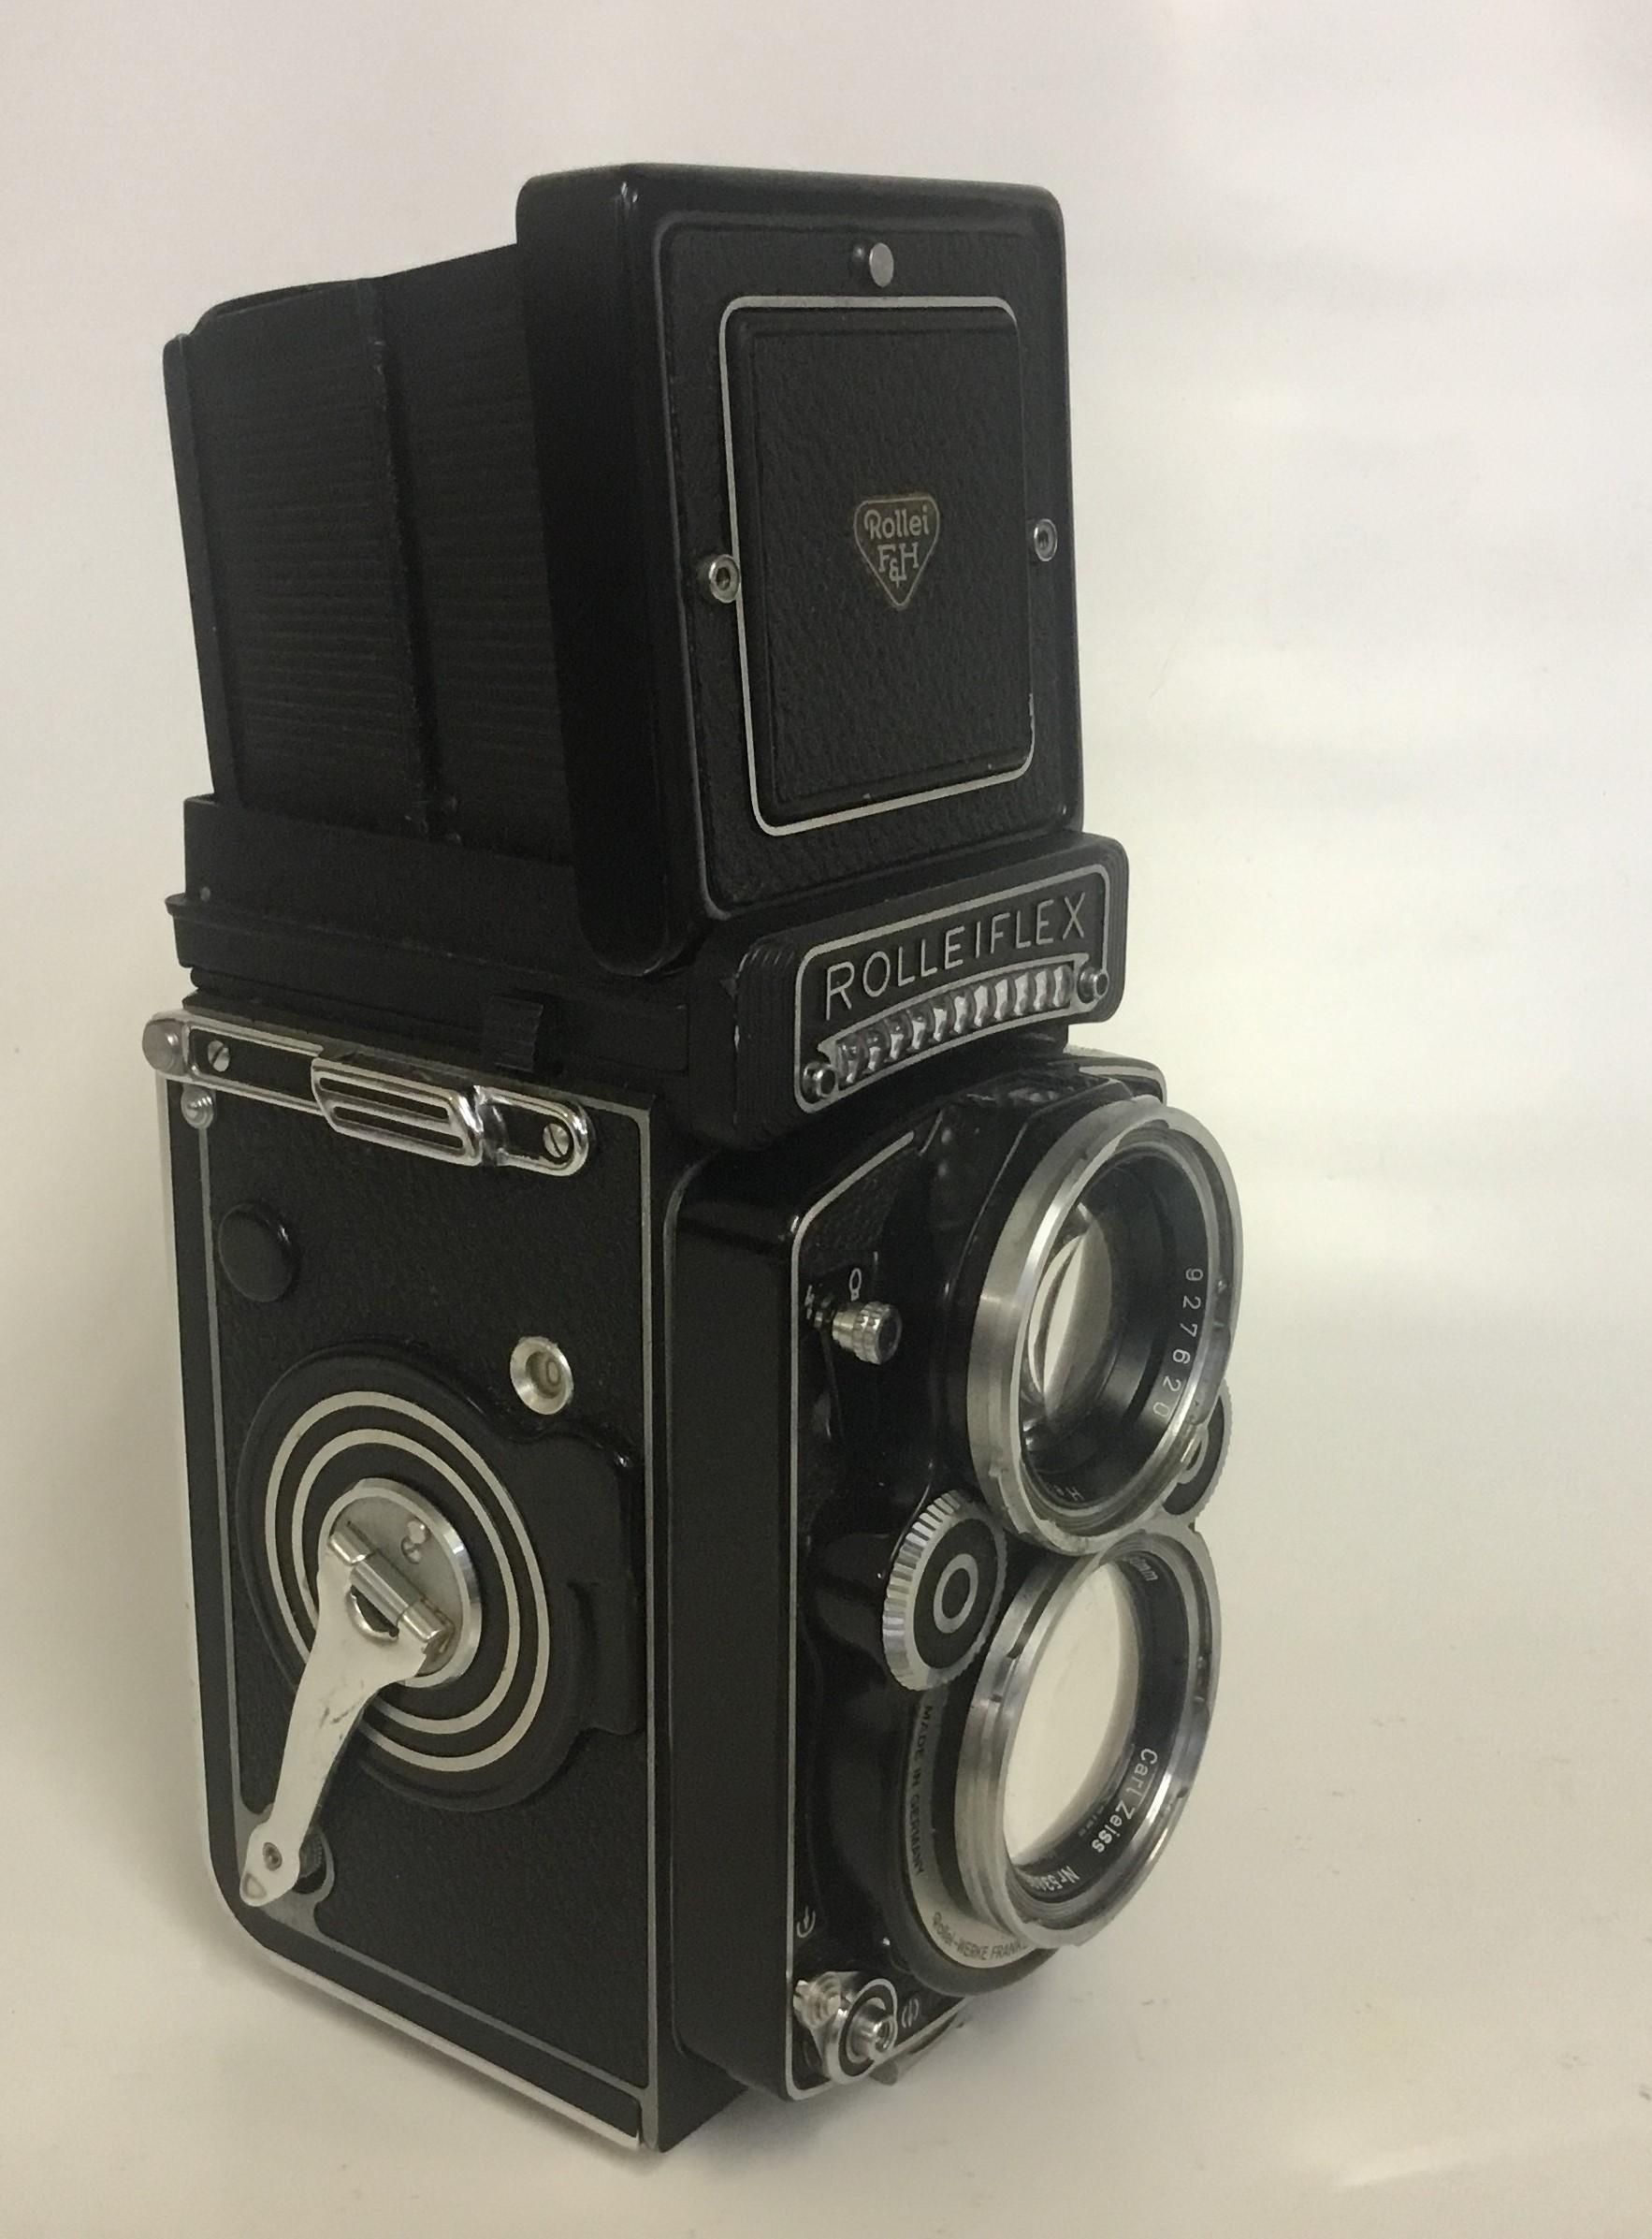 Rolleiflex White Face F TLR Camera - Image 2 of 2